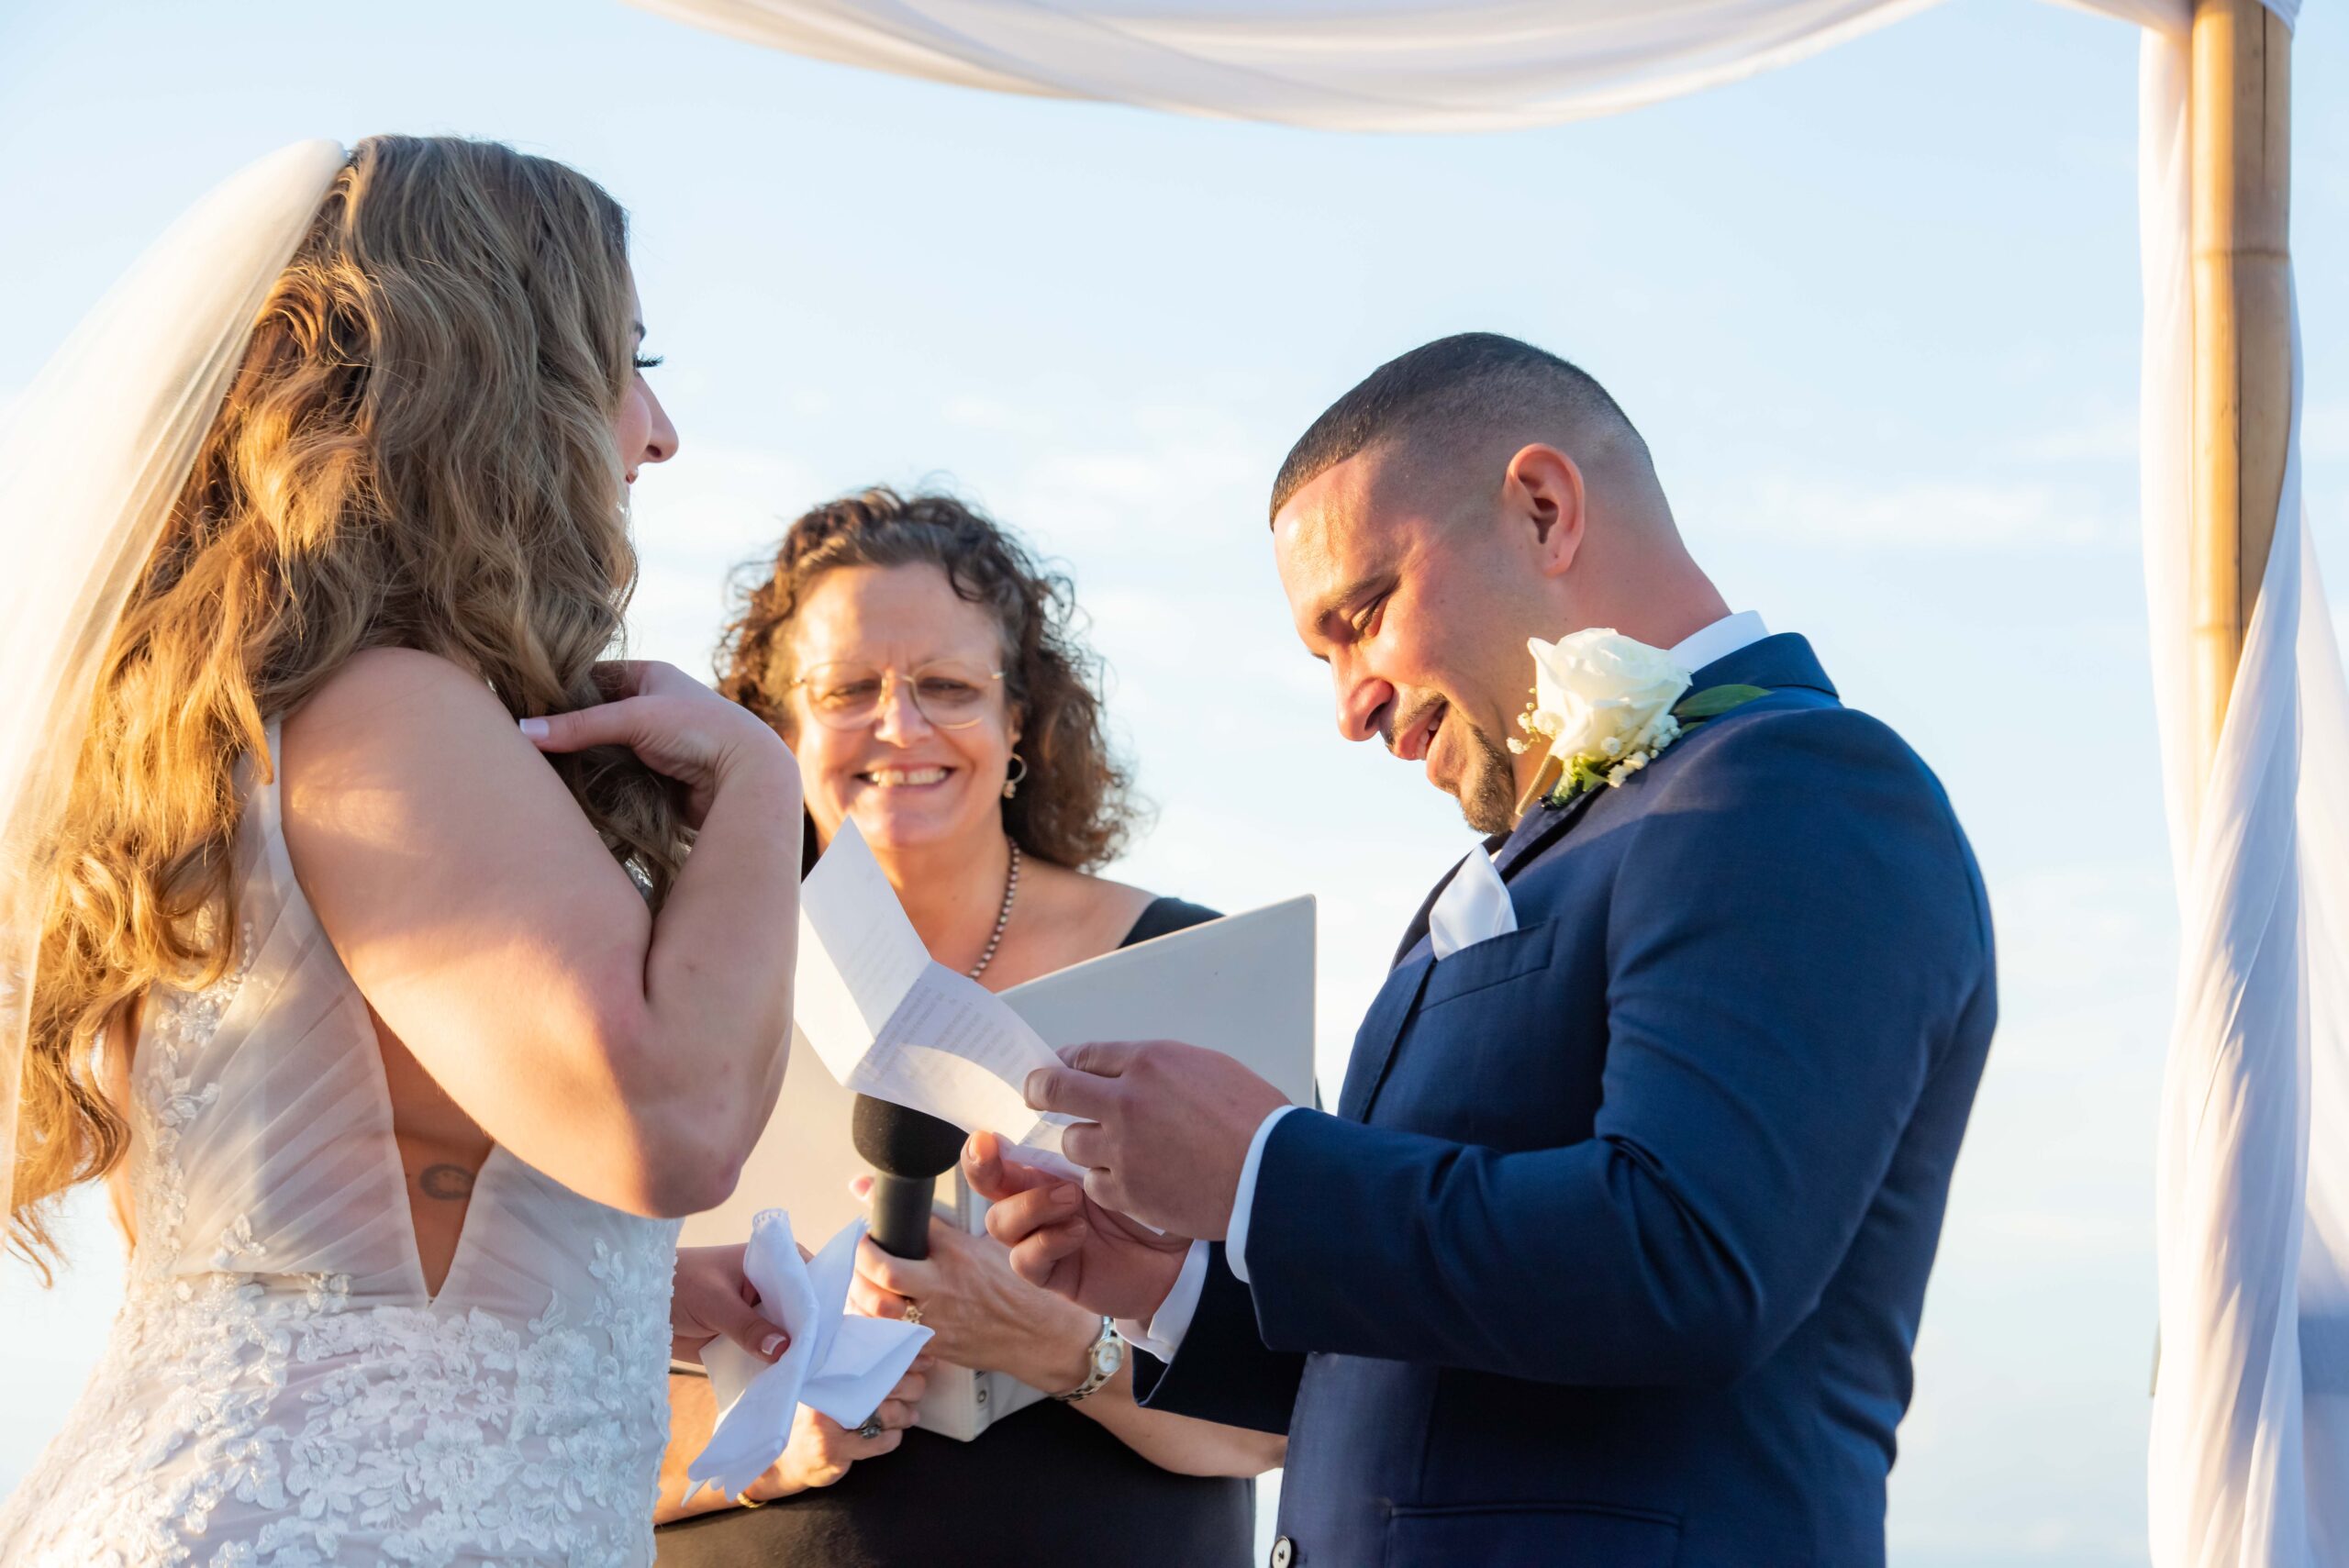 Bride and groom during wedding vows captured on film